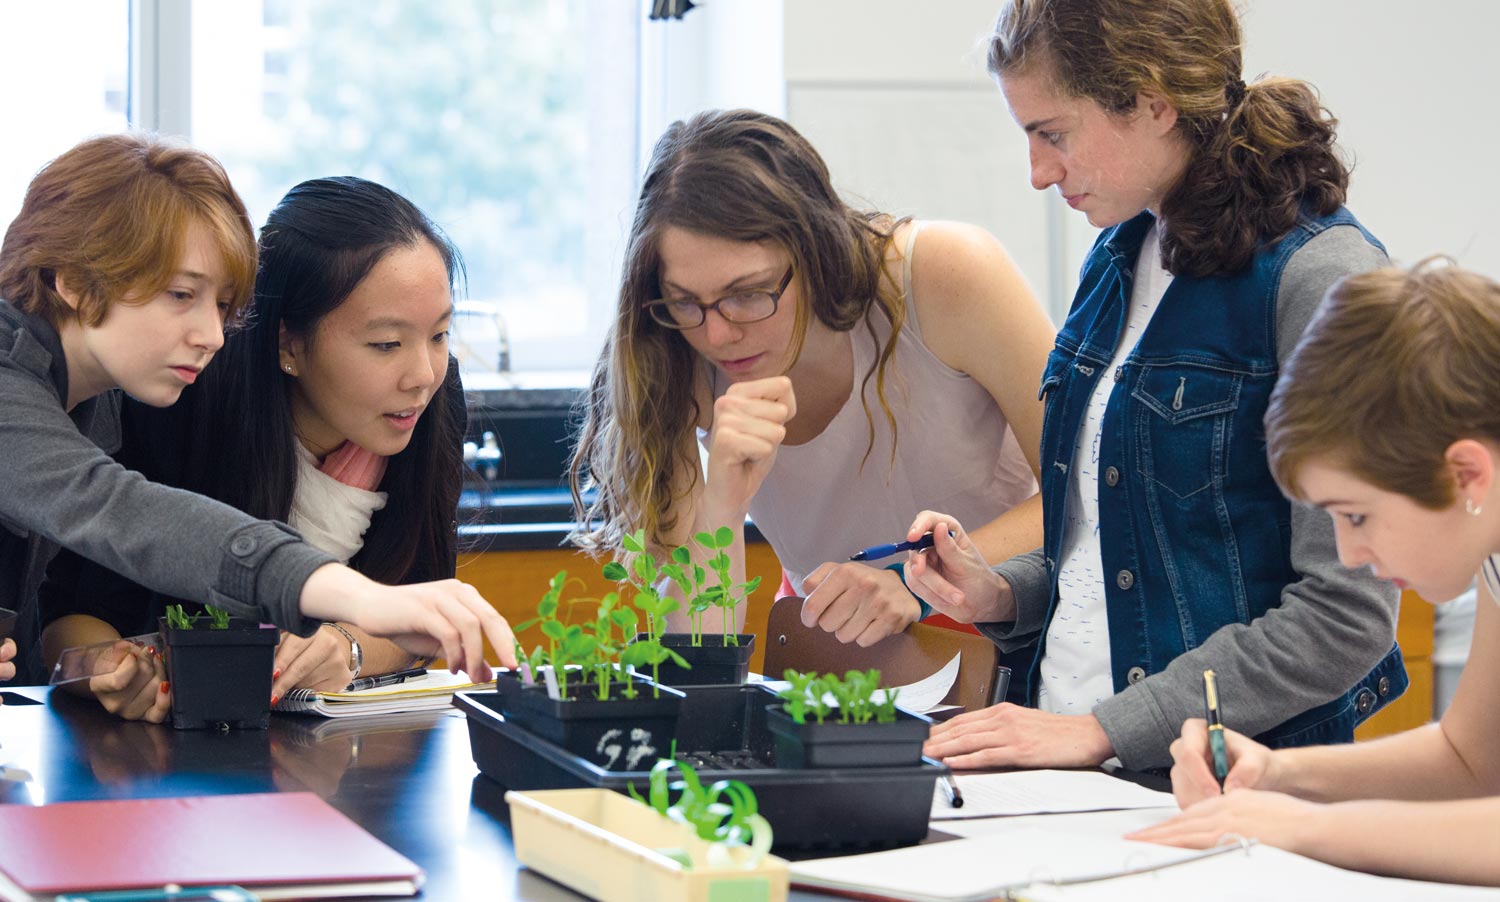 Students in biology class looking at growing plants